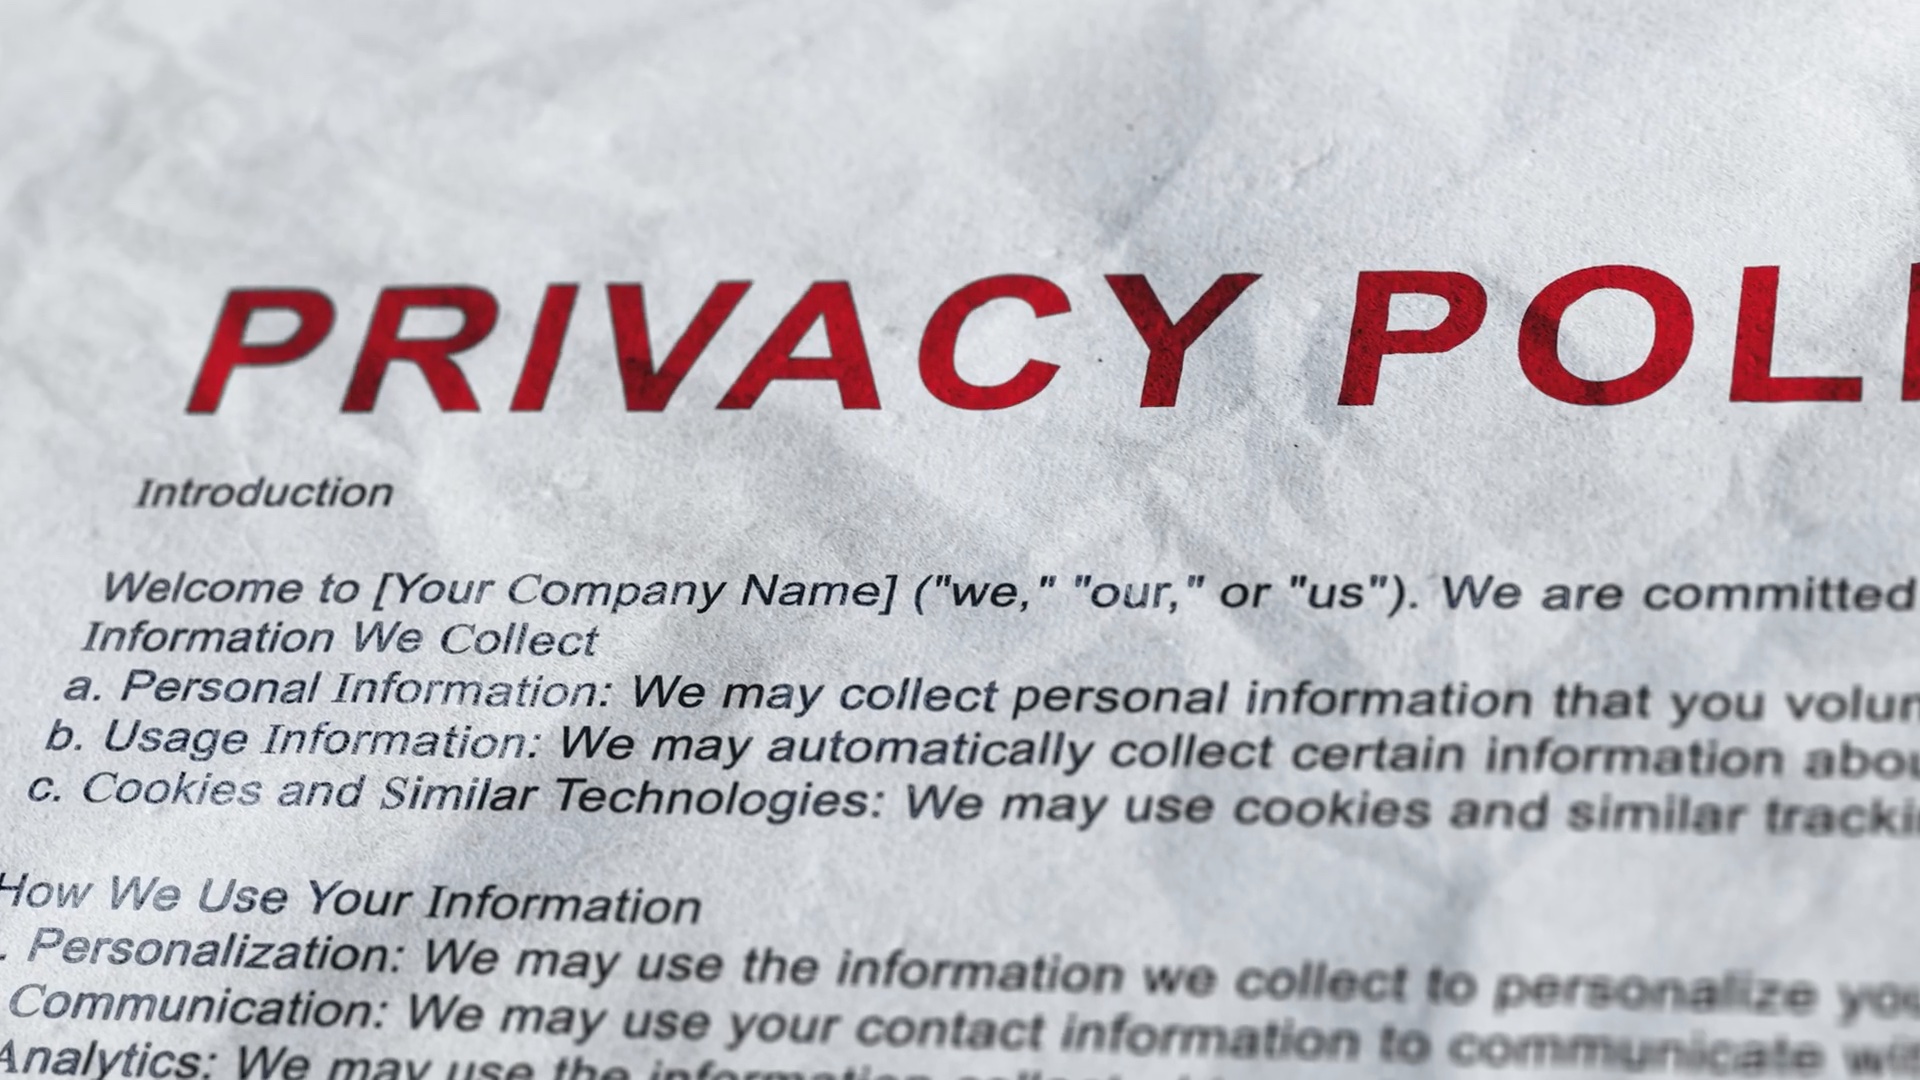 Privacy policy on a piece of paper.